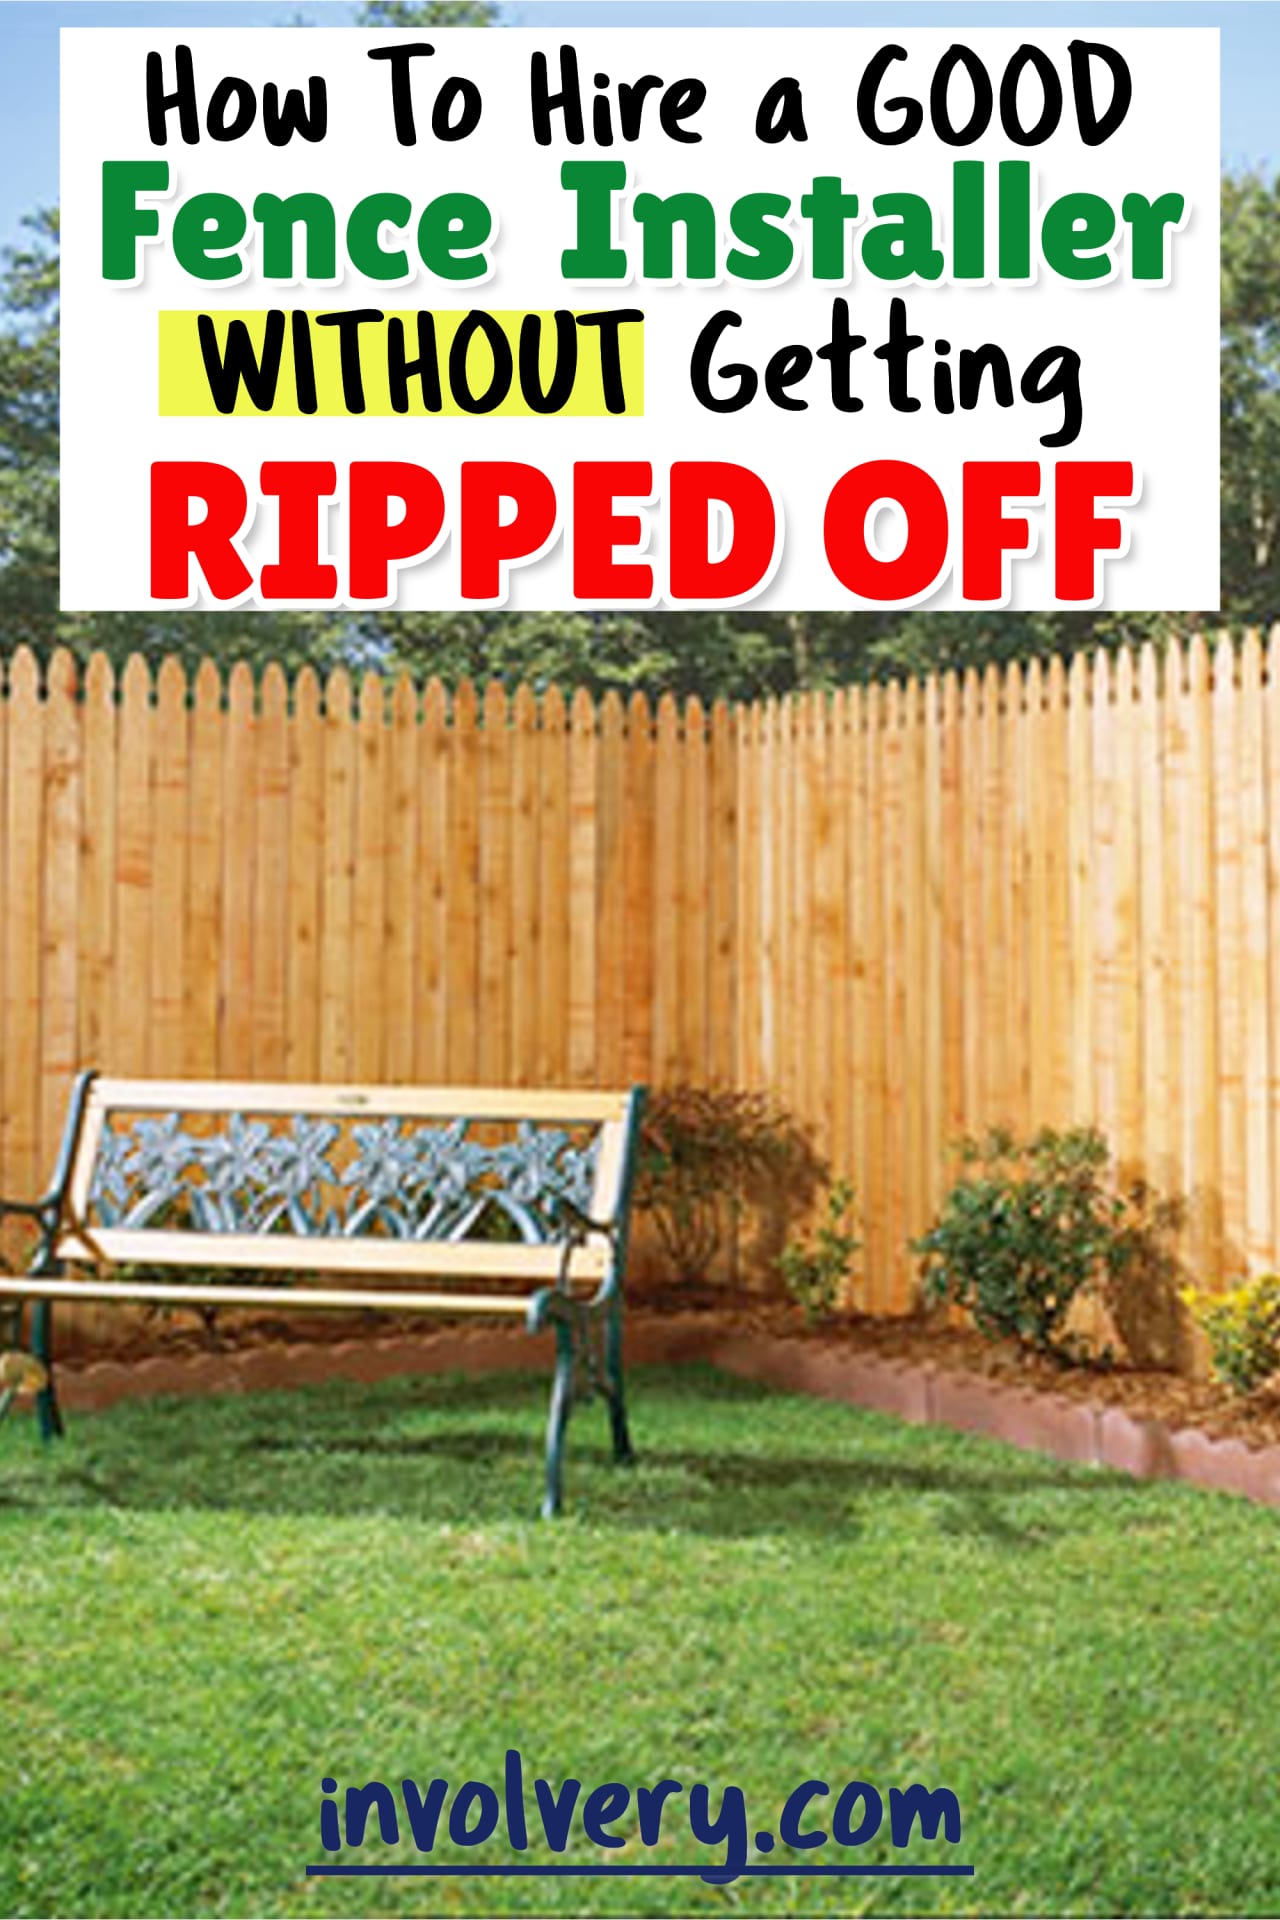 Fence Installation and Fence Ideas - how to hire a contractor To Build and Install a Fence in your yard -  questions to ask a contractor - learn about fence installation cost vs fence installation DIY - Fence Ideas - cheap and inexpensive backyard fence ideas - how to save money on home renovations and improvements when fencing in backyard - backyard fences on a budget - easy DIY fence ideas and contractor tips - backyard fence ideas for dogs - cost to fence backyard and build fence panels and gates - how to build a fence on a budget